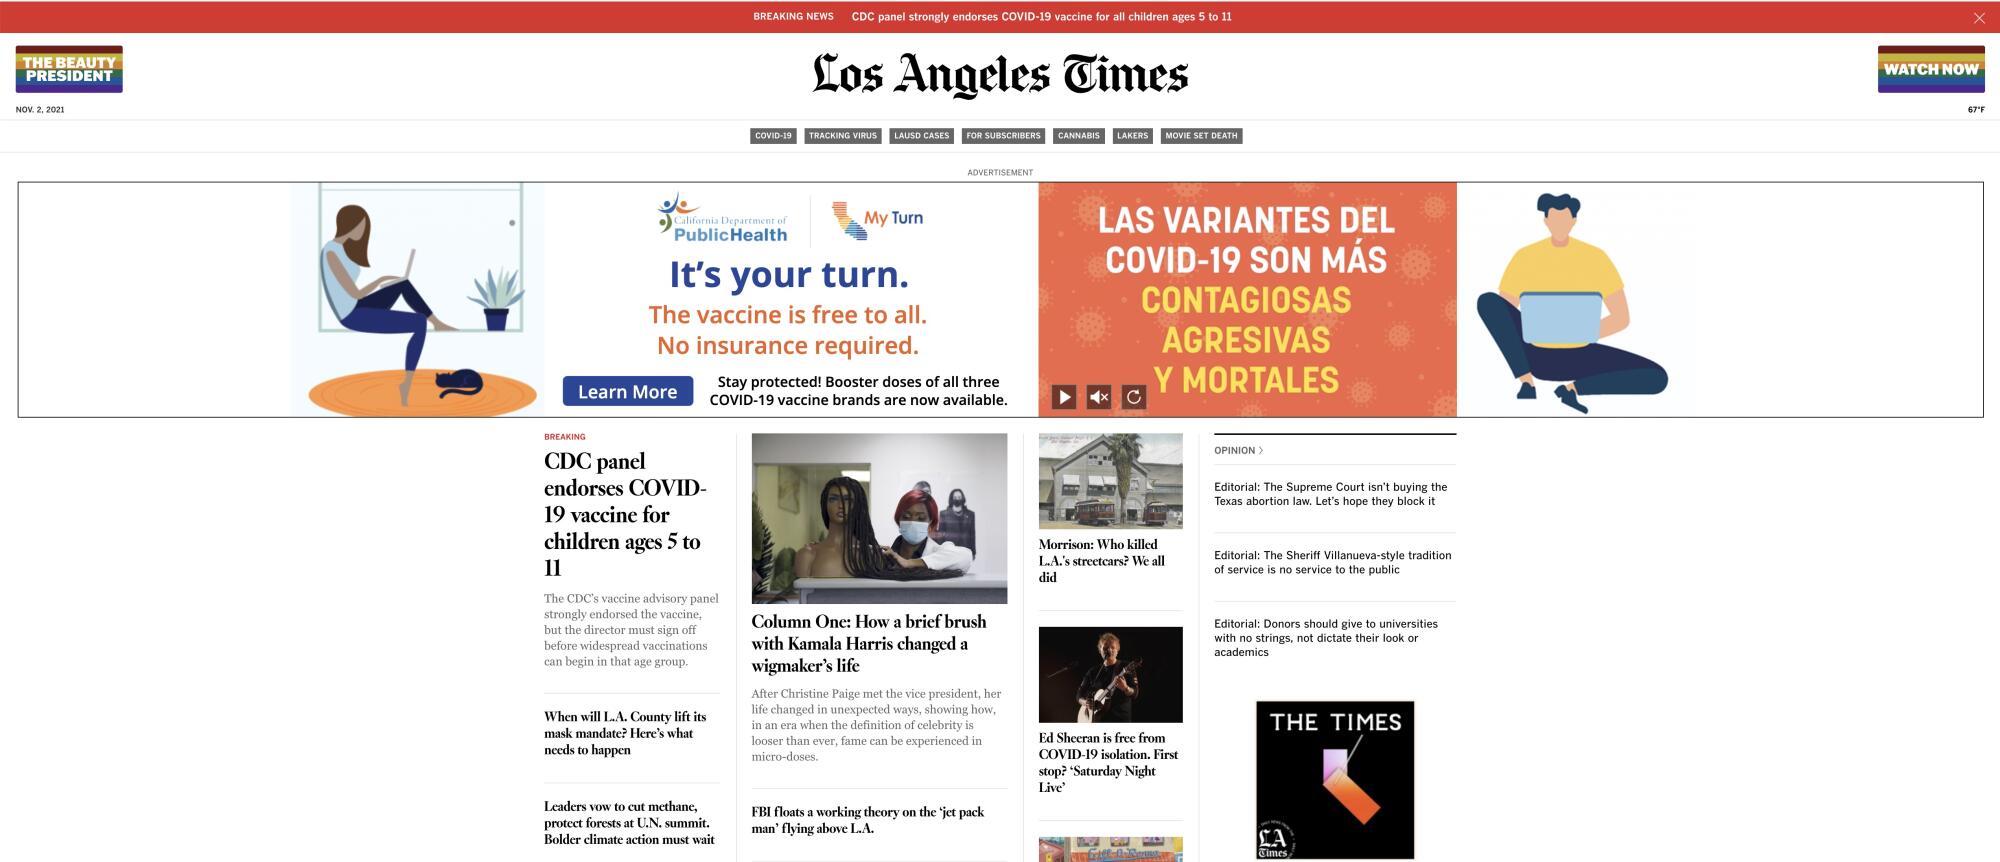 The homepage of the Los Angeles Times